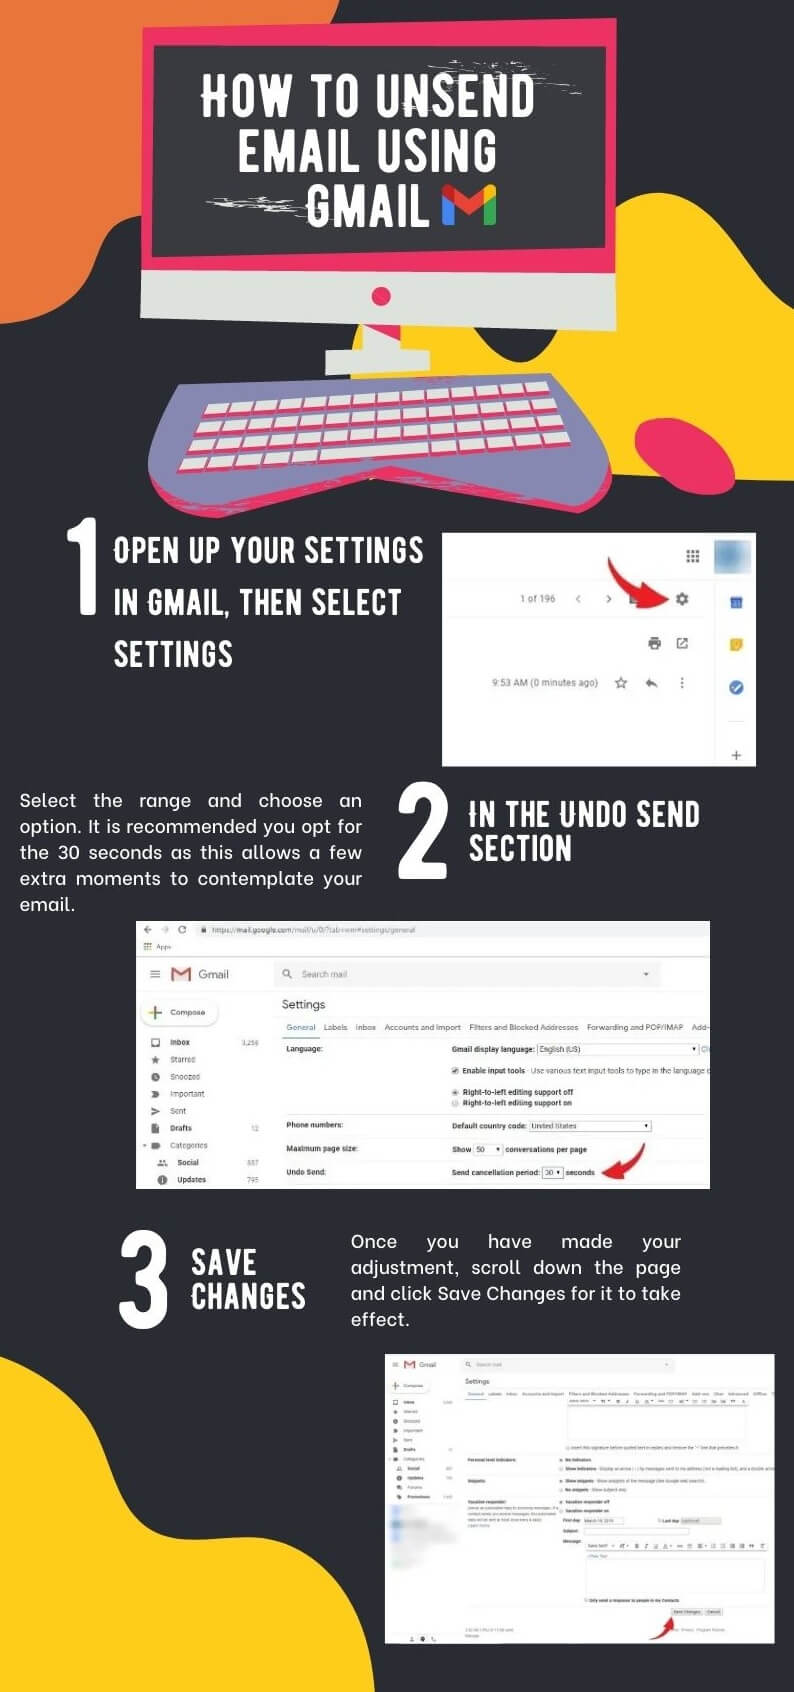 How to unsend email using Gmail?